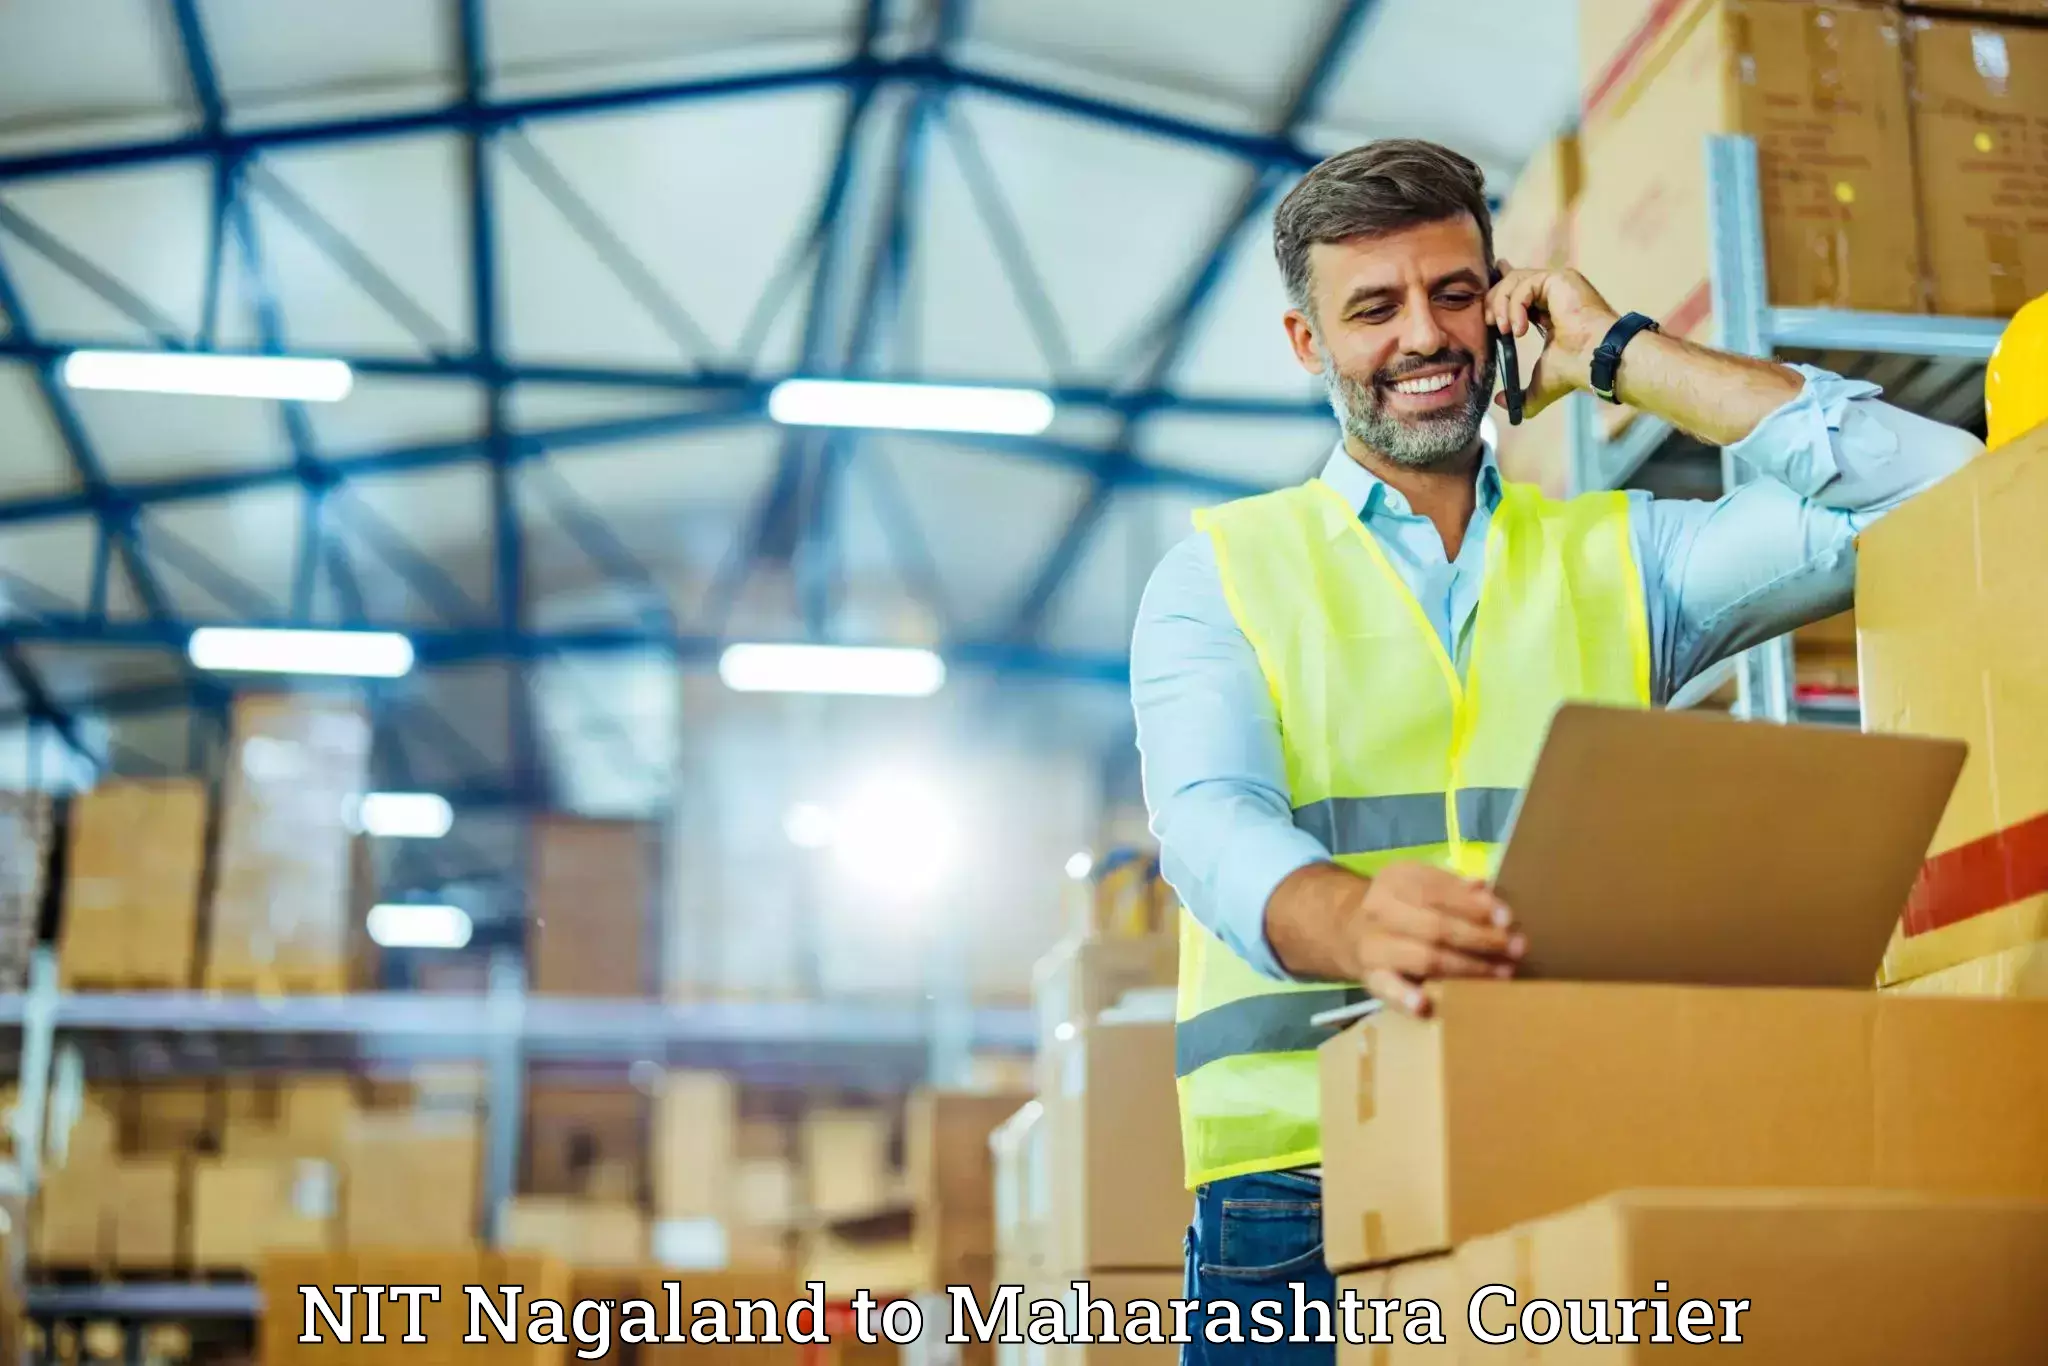 Efficient relocation services NIT Nagaland to Lonere